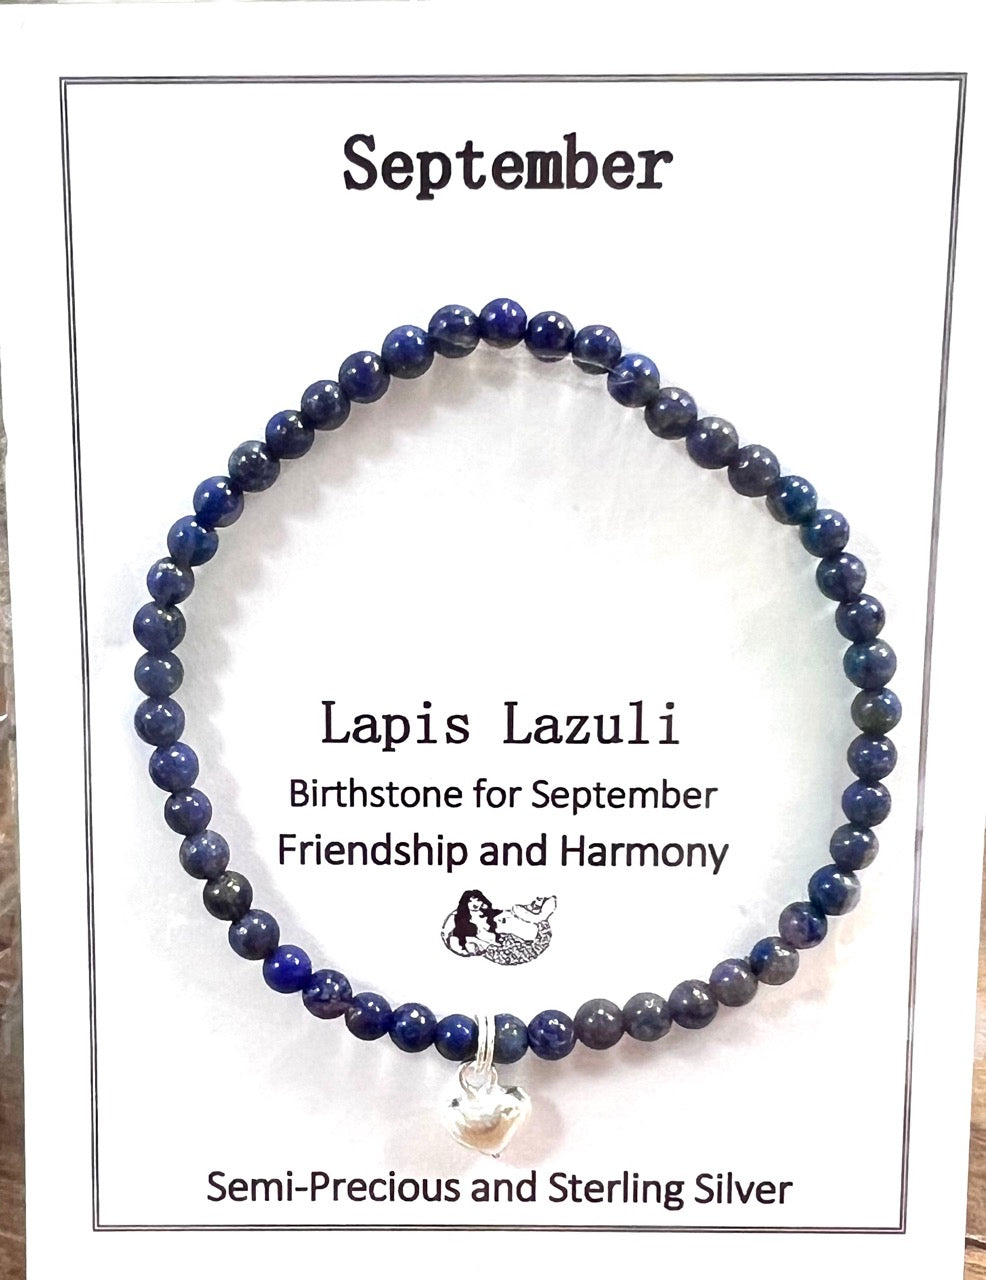 September birthstone bracelet with lapis lazuli beads and  a sterling silver heart